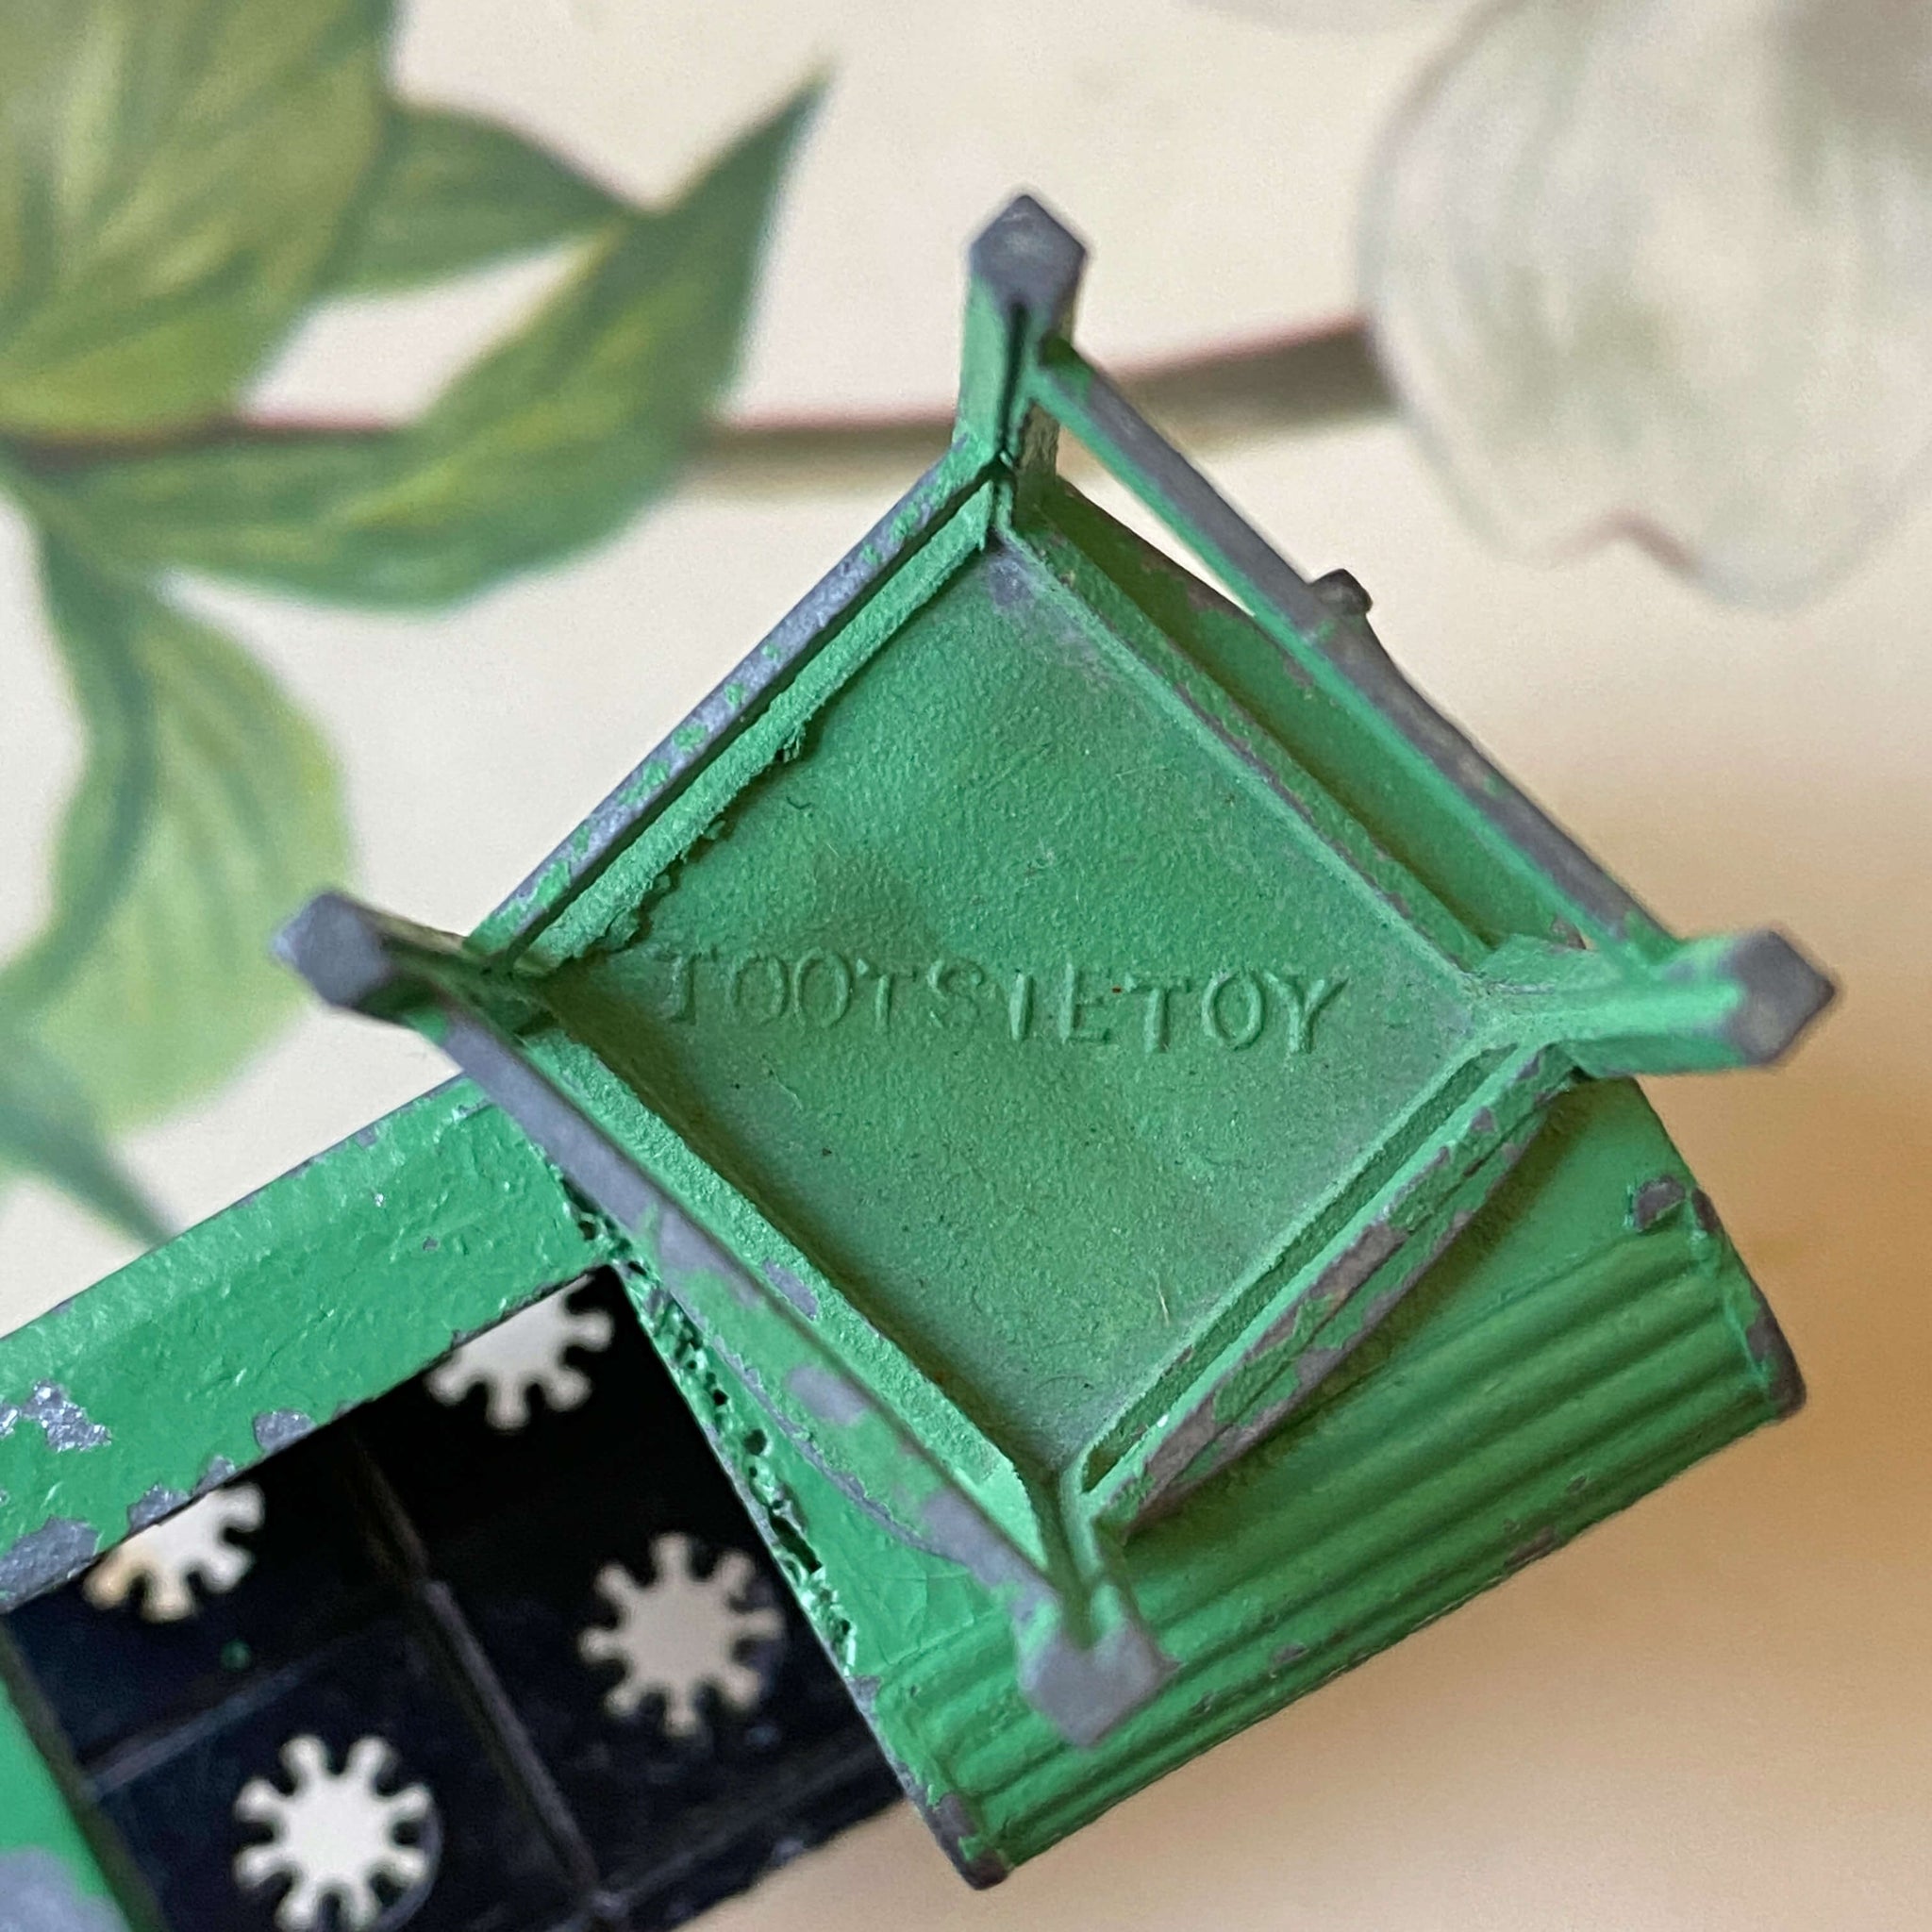 Vintage 1930s Green Tootsietoy Stove and Chair - Miniature Dollhouse Furniture